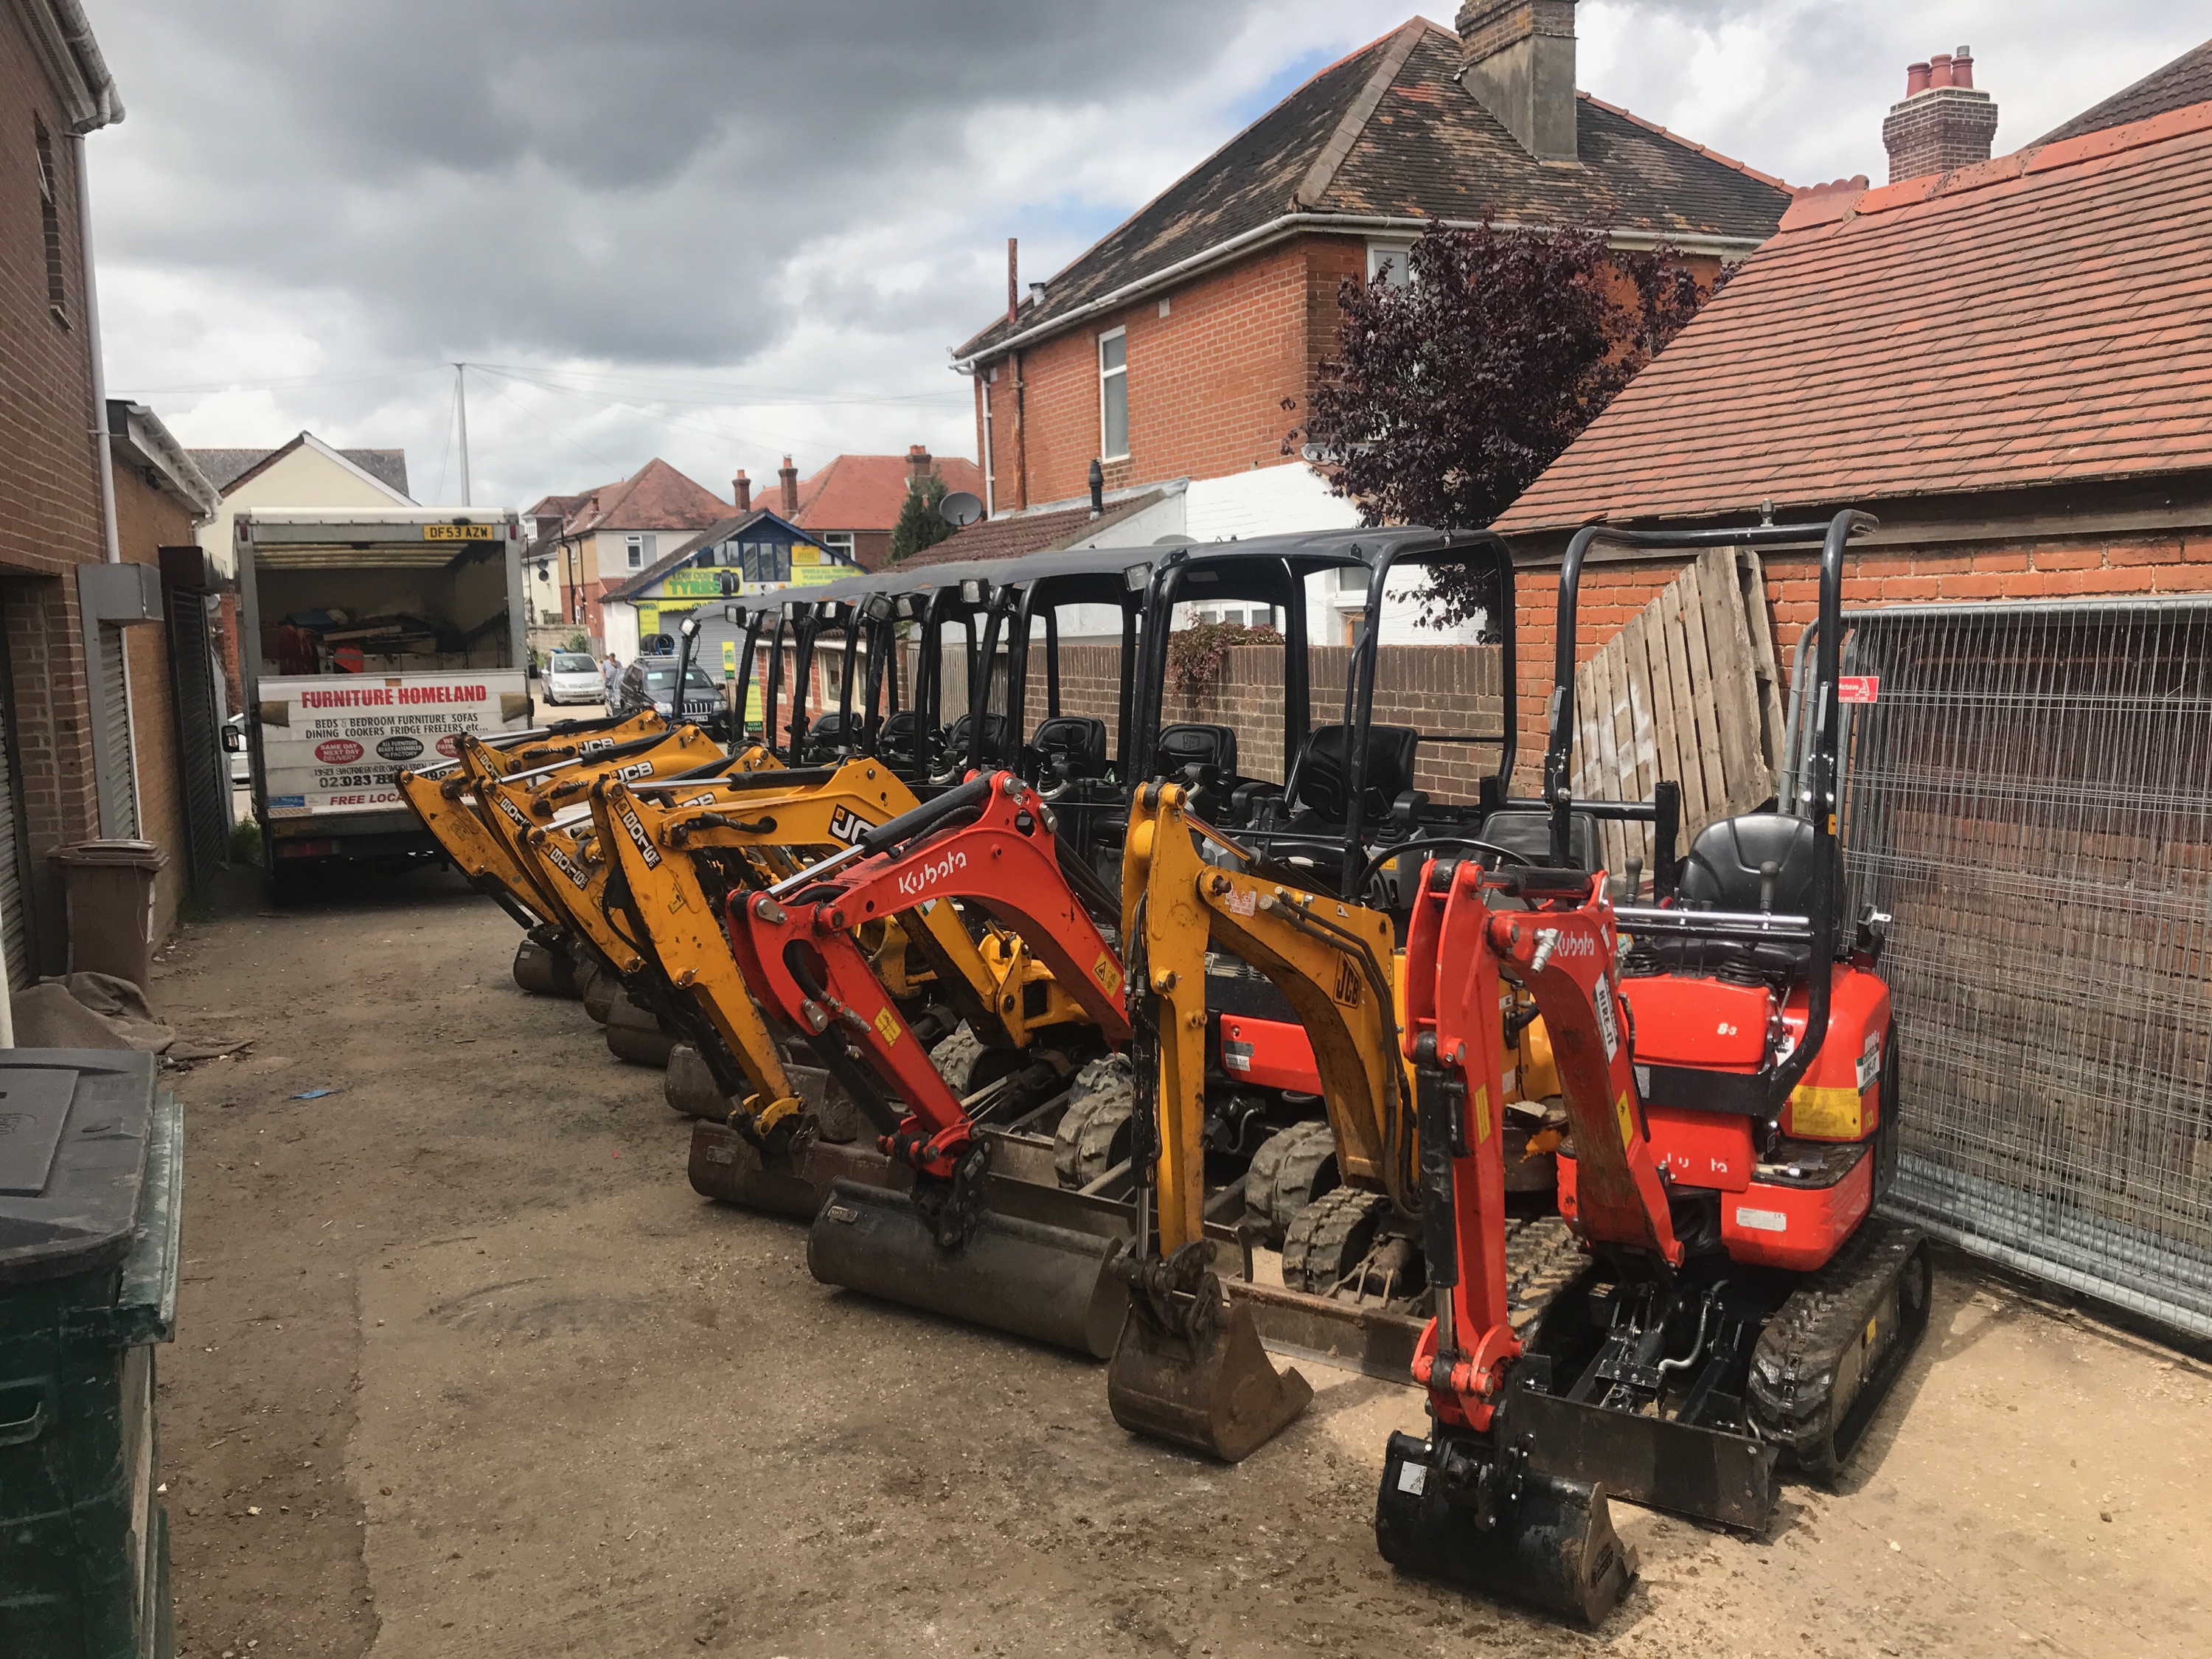 Diggers for hire in Southampton, Eastleigh and Winchester